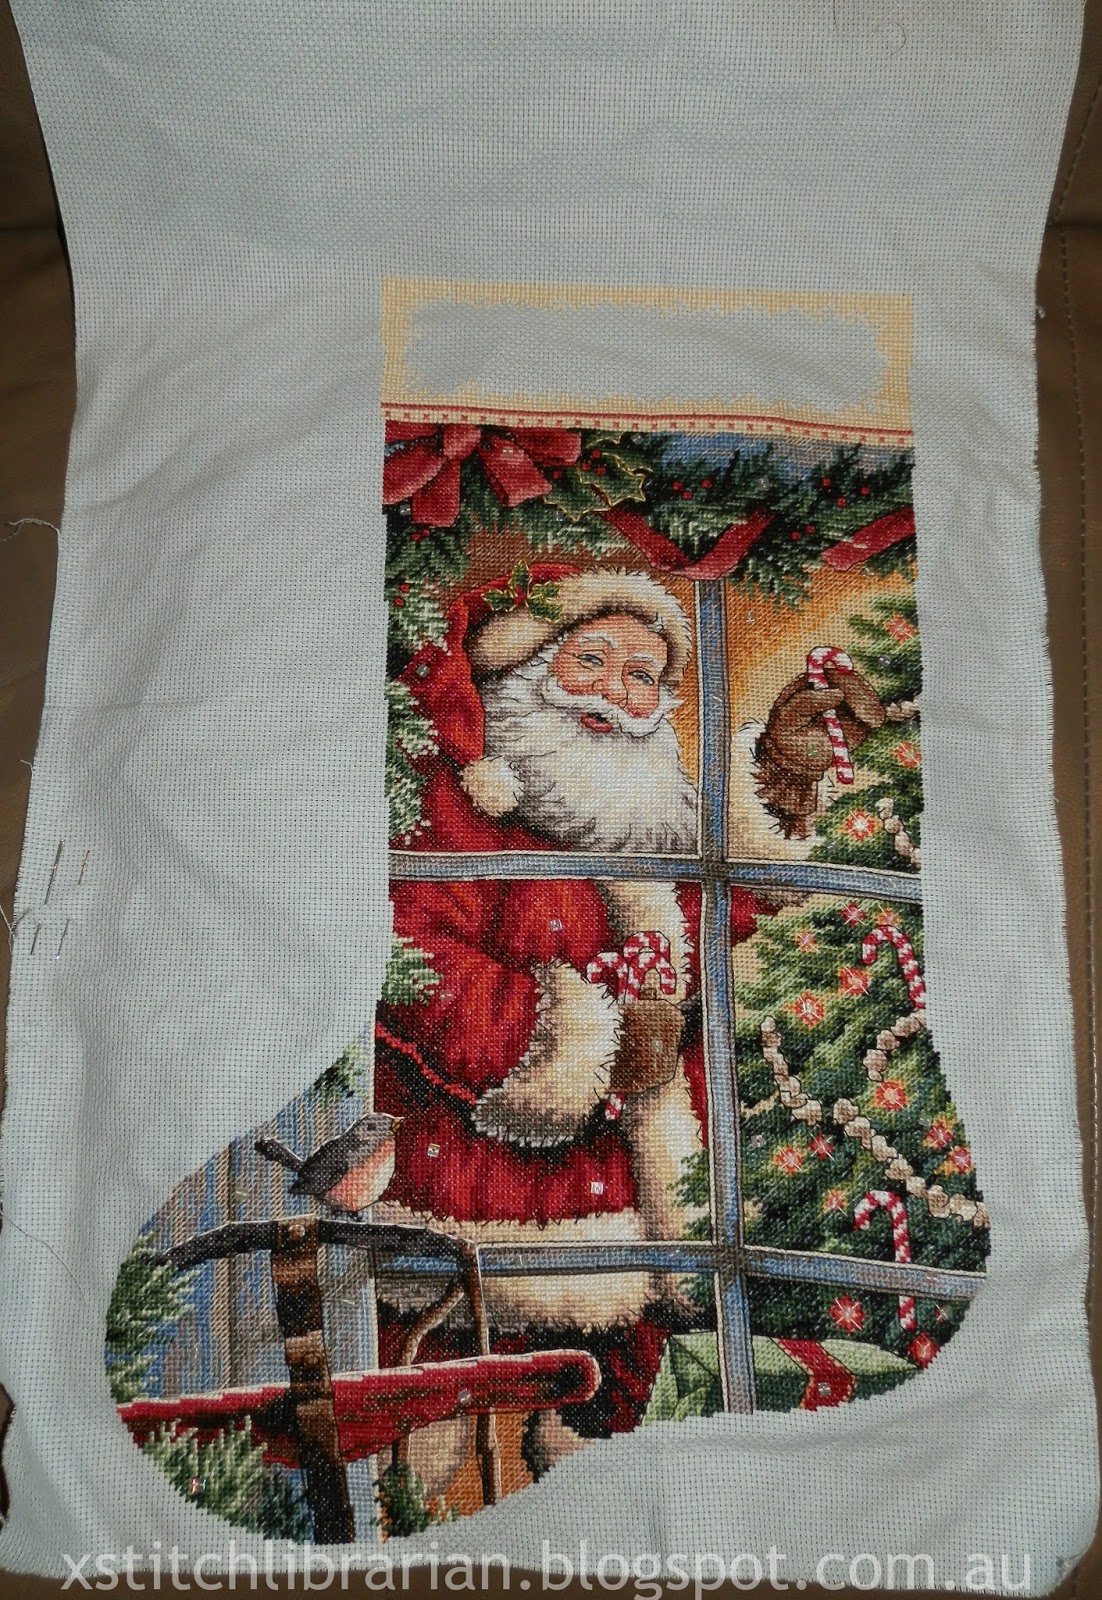 The Cross-Stitching & Patchworking Librarian: Candy Cane Santa Stocking ...